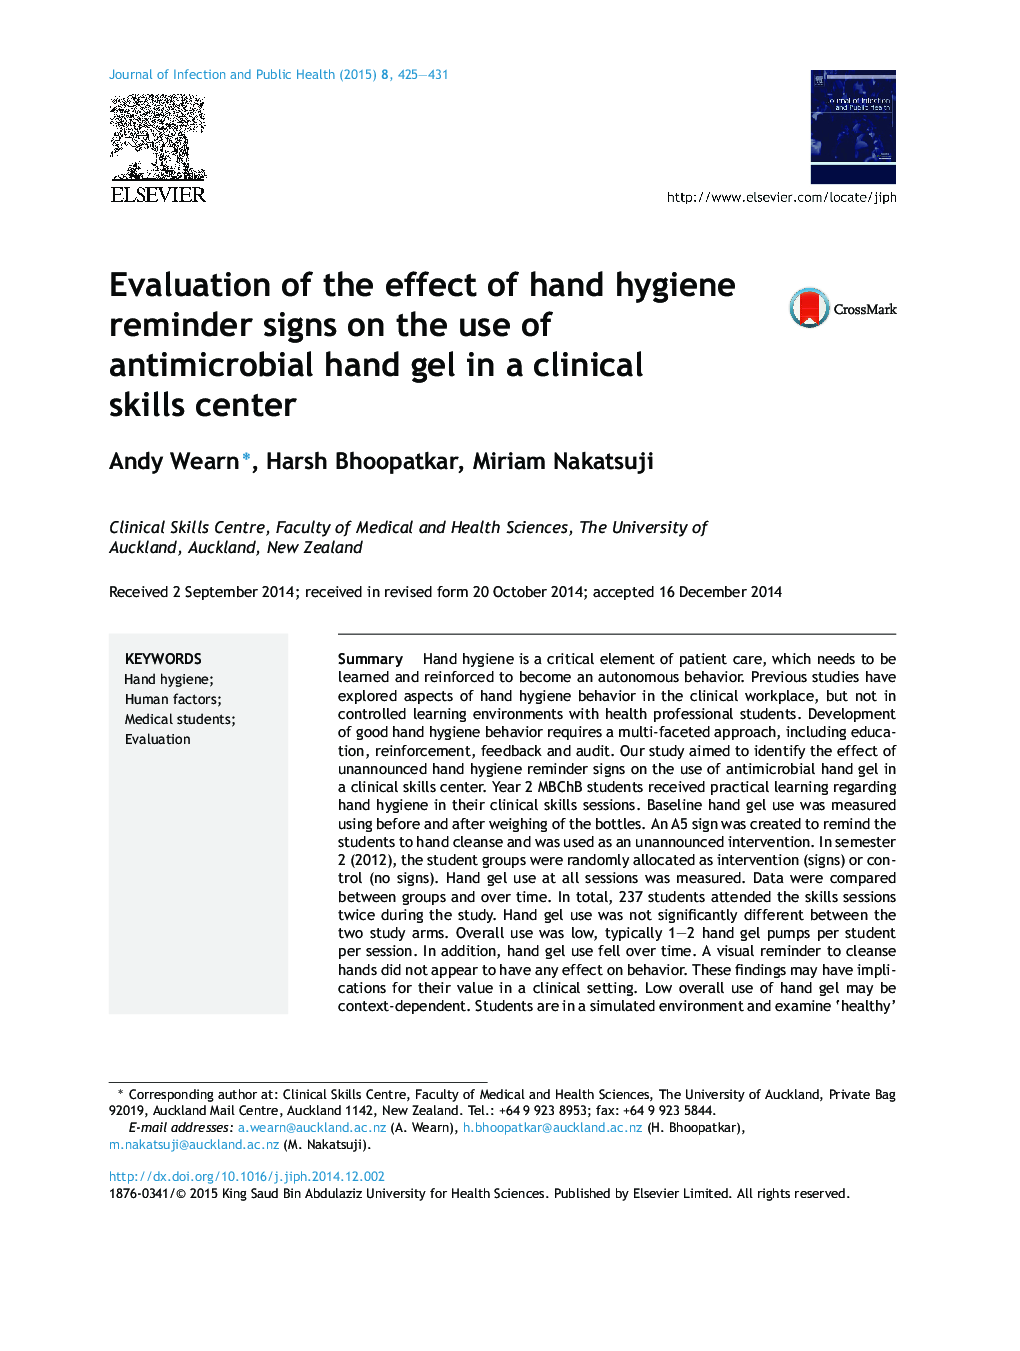 Evaluation of the effect of hand hygiene reminder signs on the use of antimicrobial hand gel in a clinical skills center